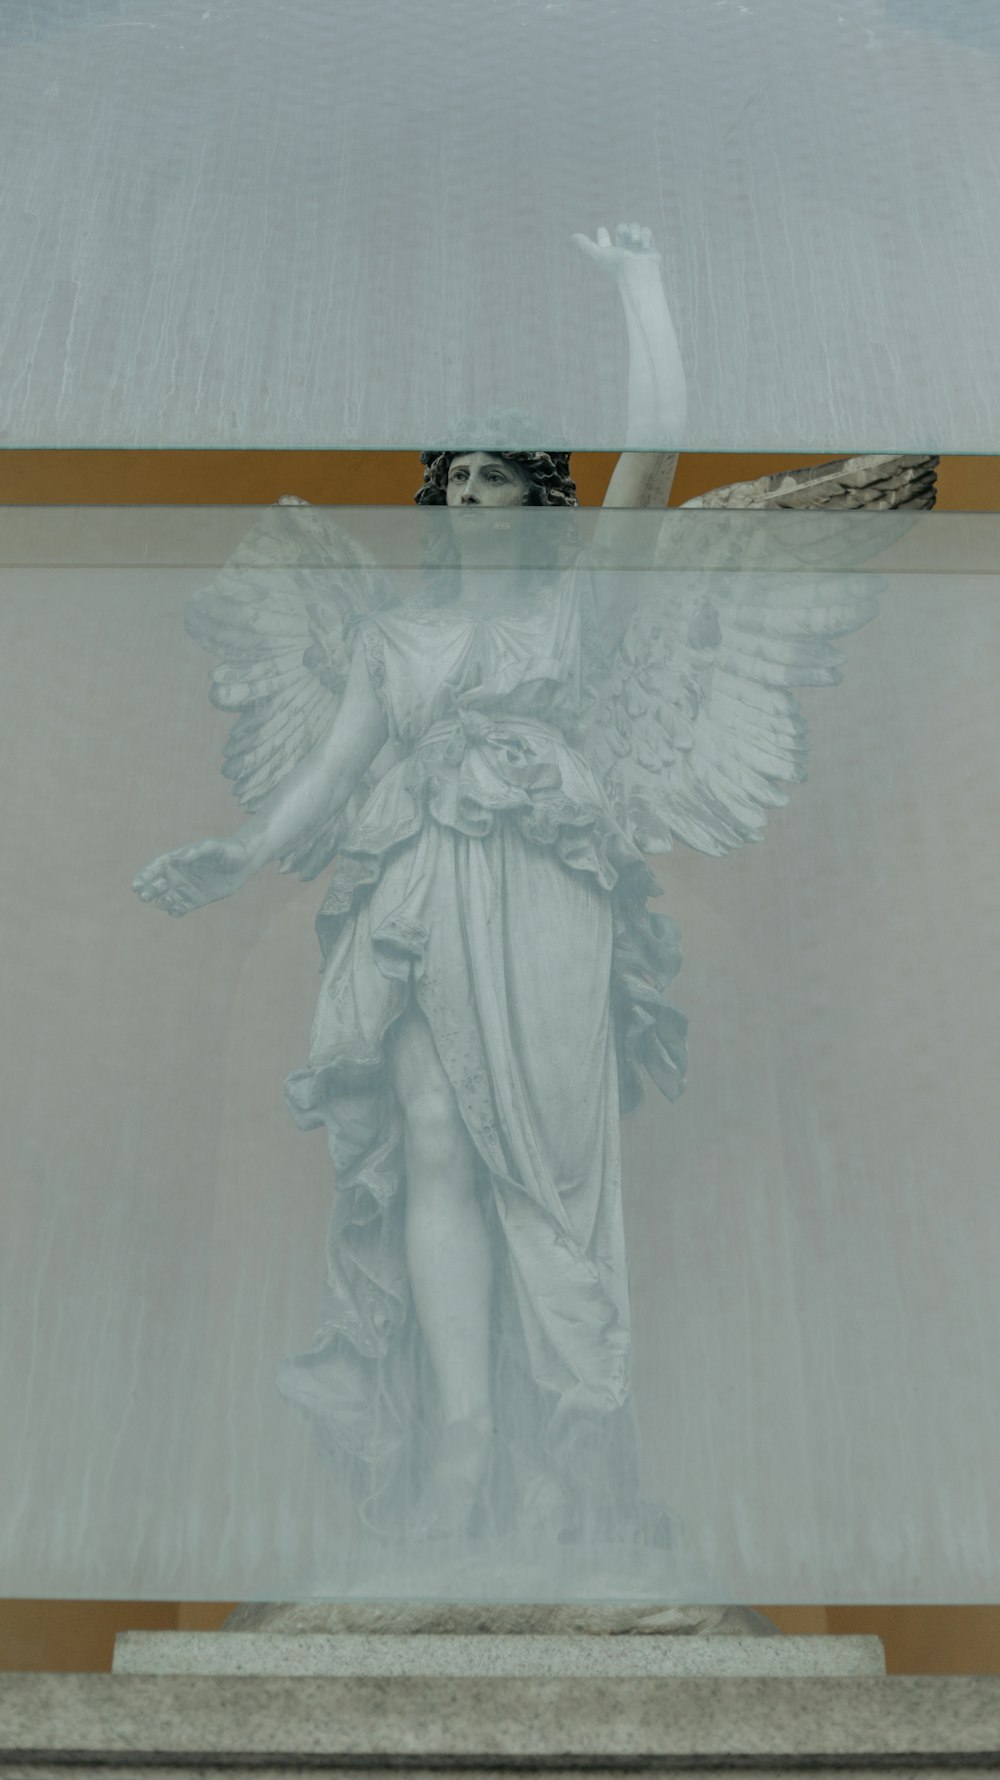 a statue of an angel in a glass case